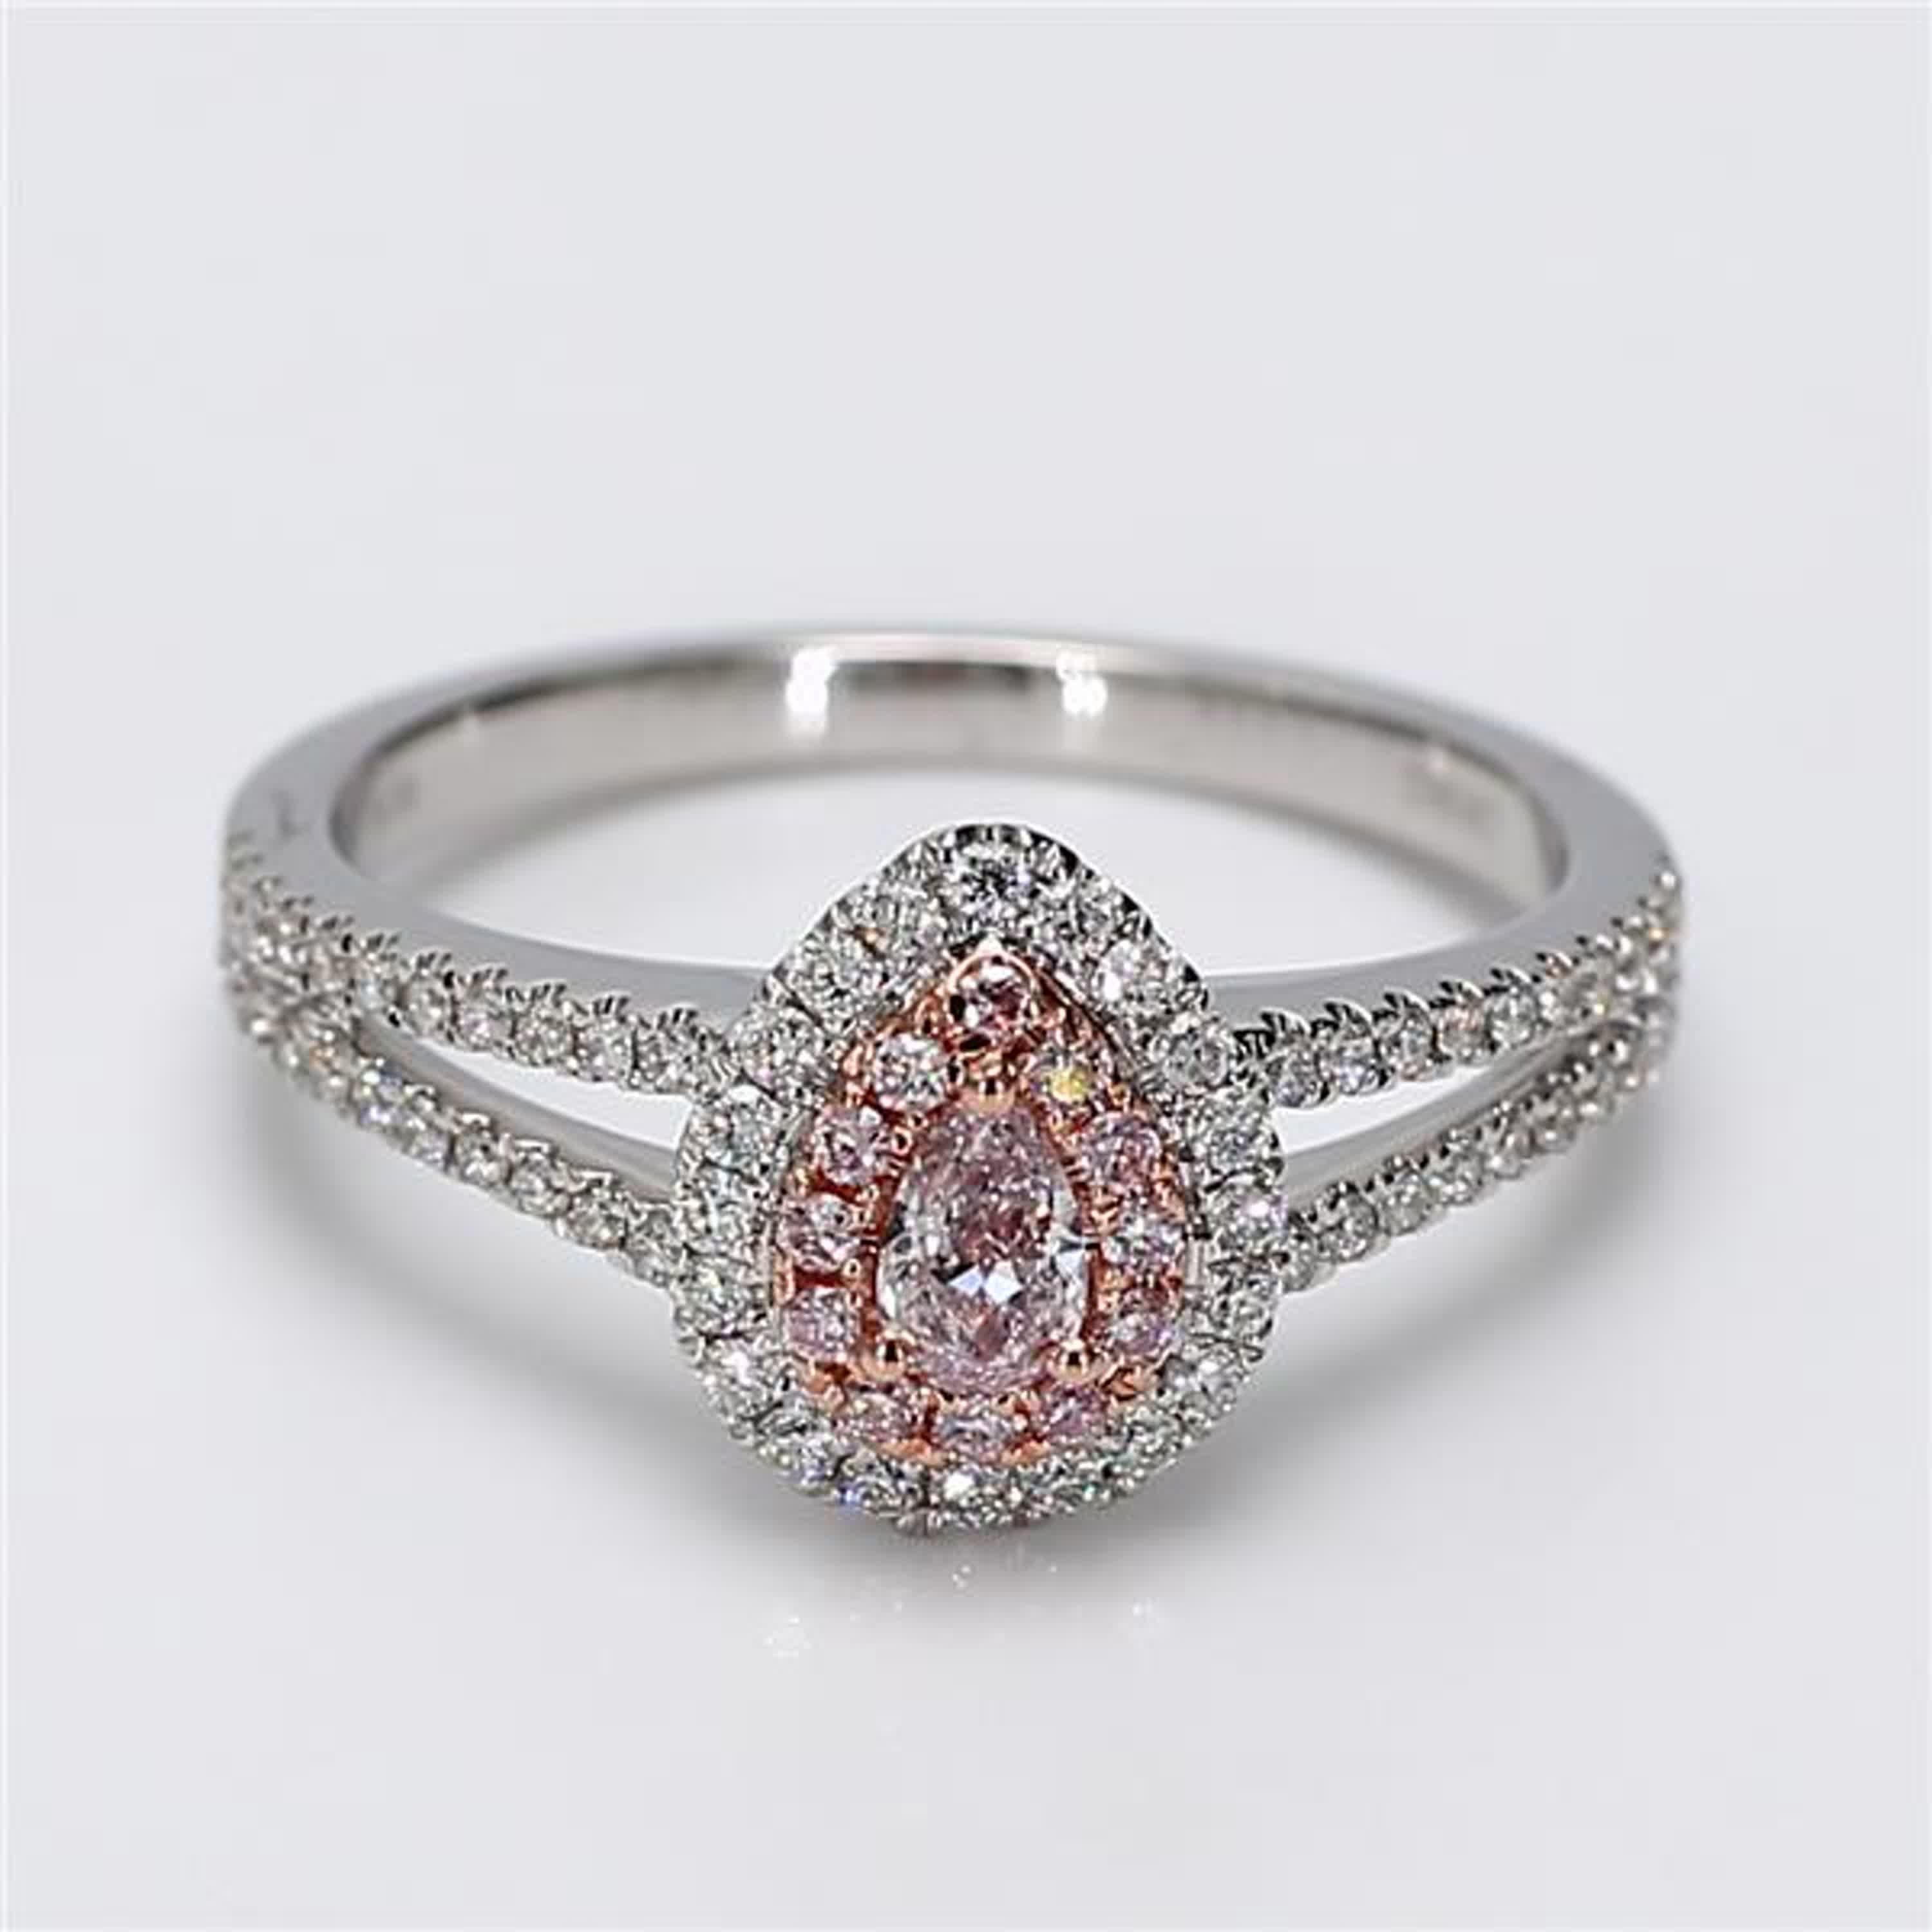 RareGemWorld's classic GIA certified diamond ring. Mounted in a beautiful 18K Rose and White Gold setting with a natural pear cut pink diamond. The pink diamond is surrounded by round natural pink diamond melee and round natural white diamond melee.